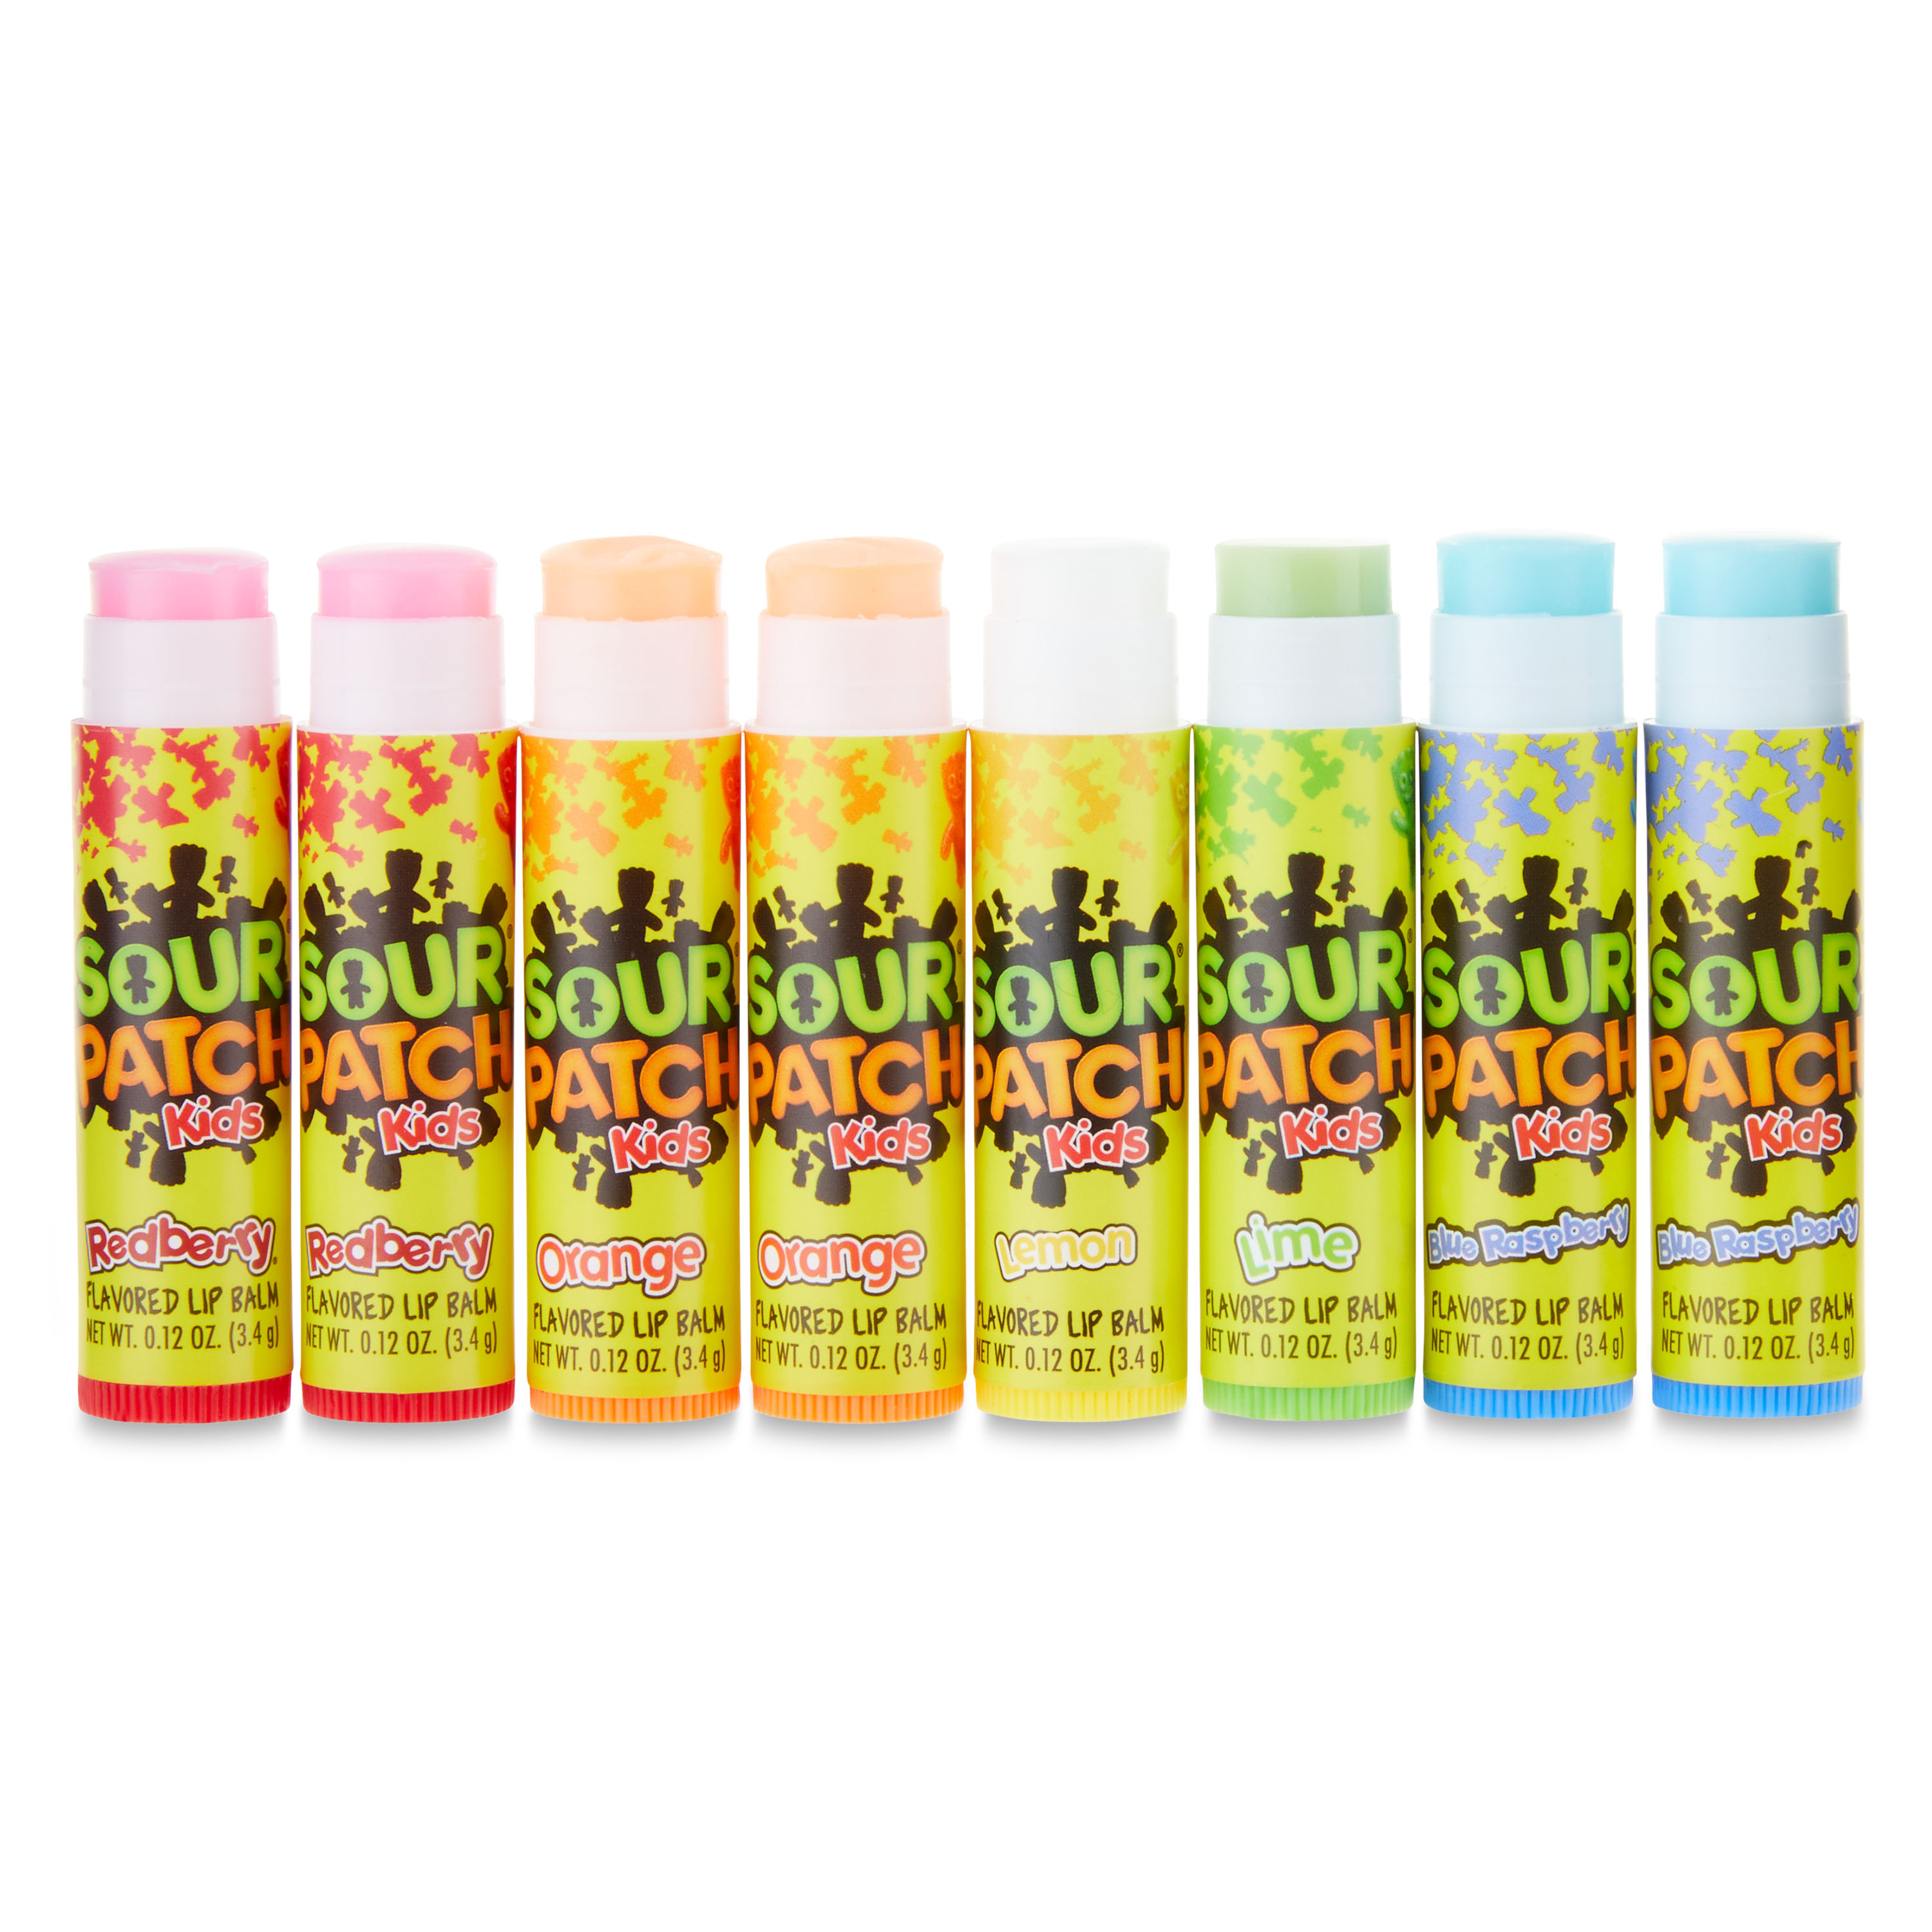 Sour Patch Kids Flavored Lip Balm, 8 Count